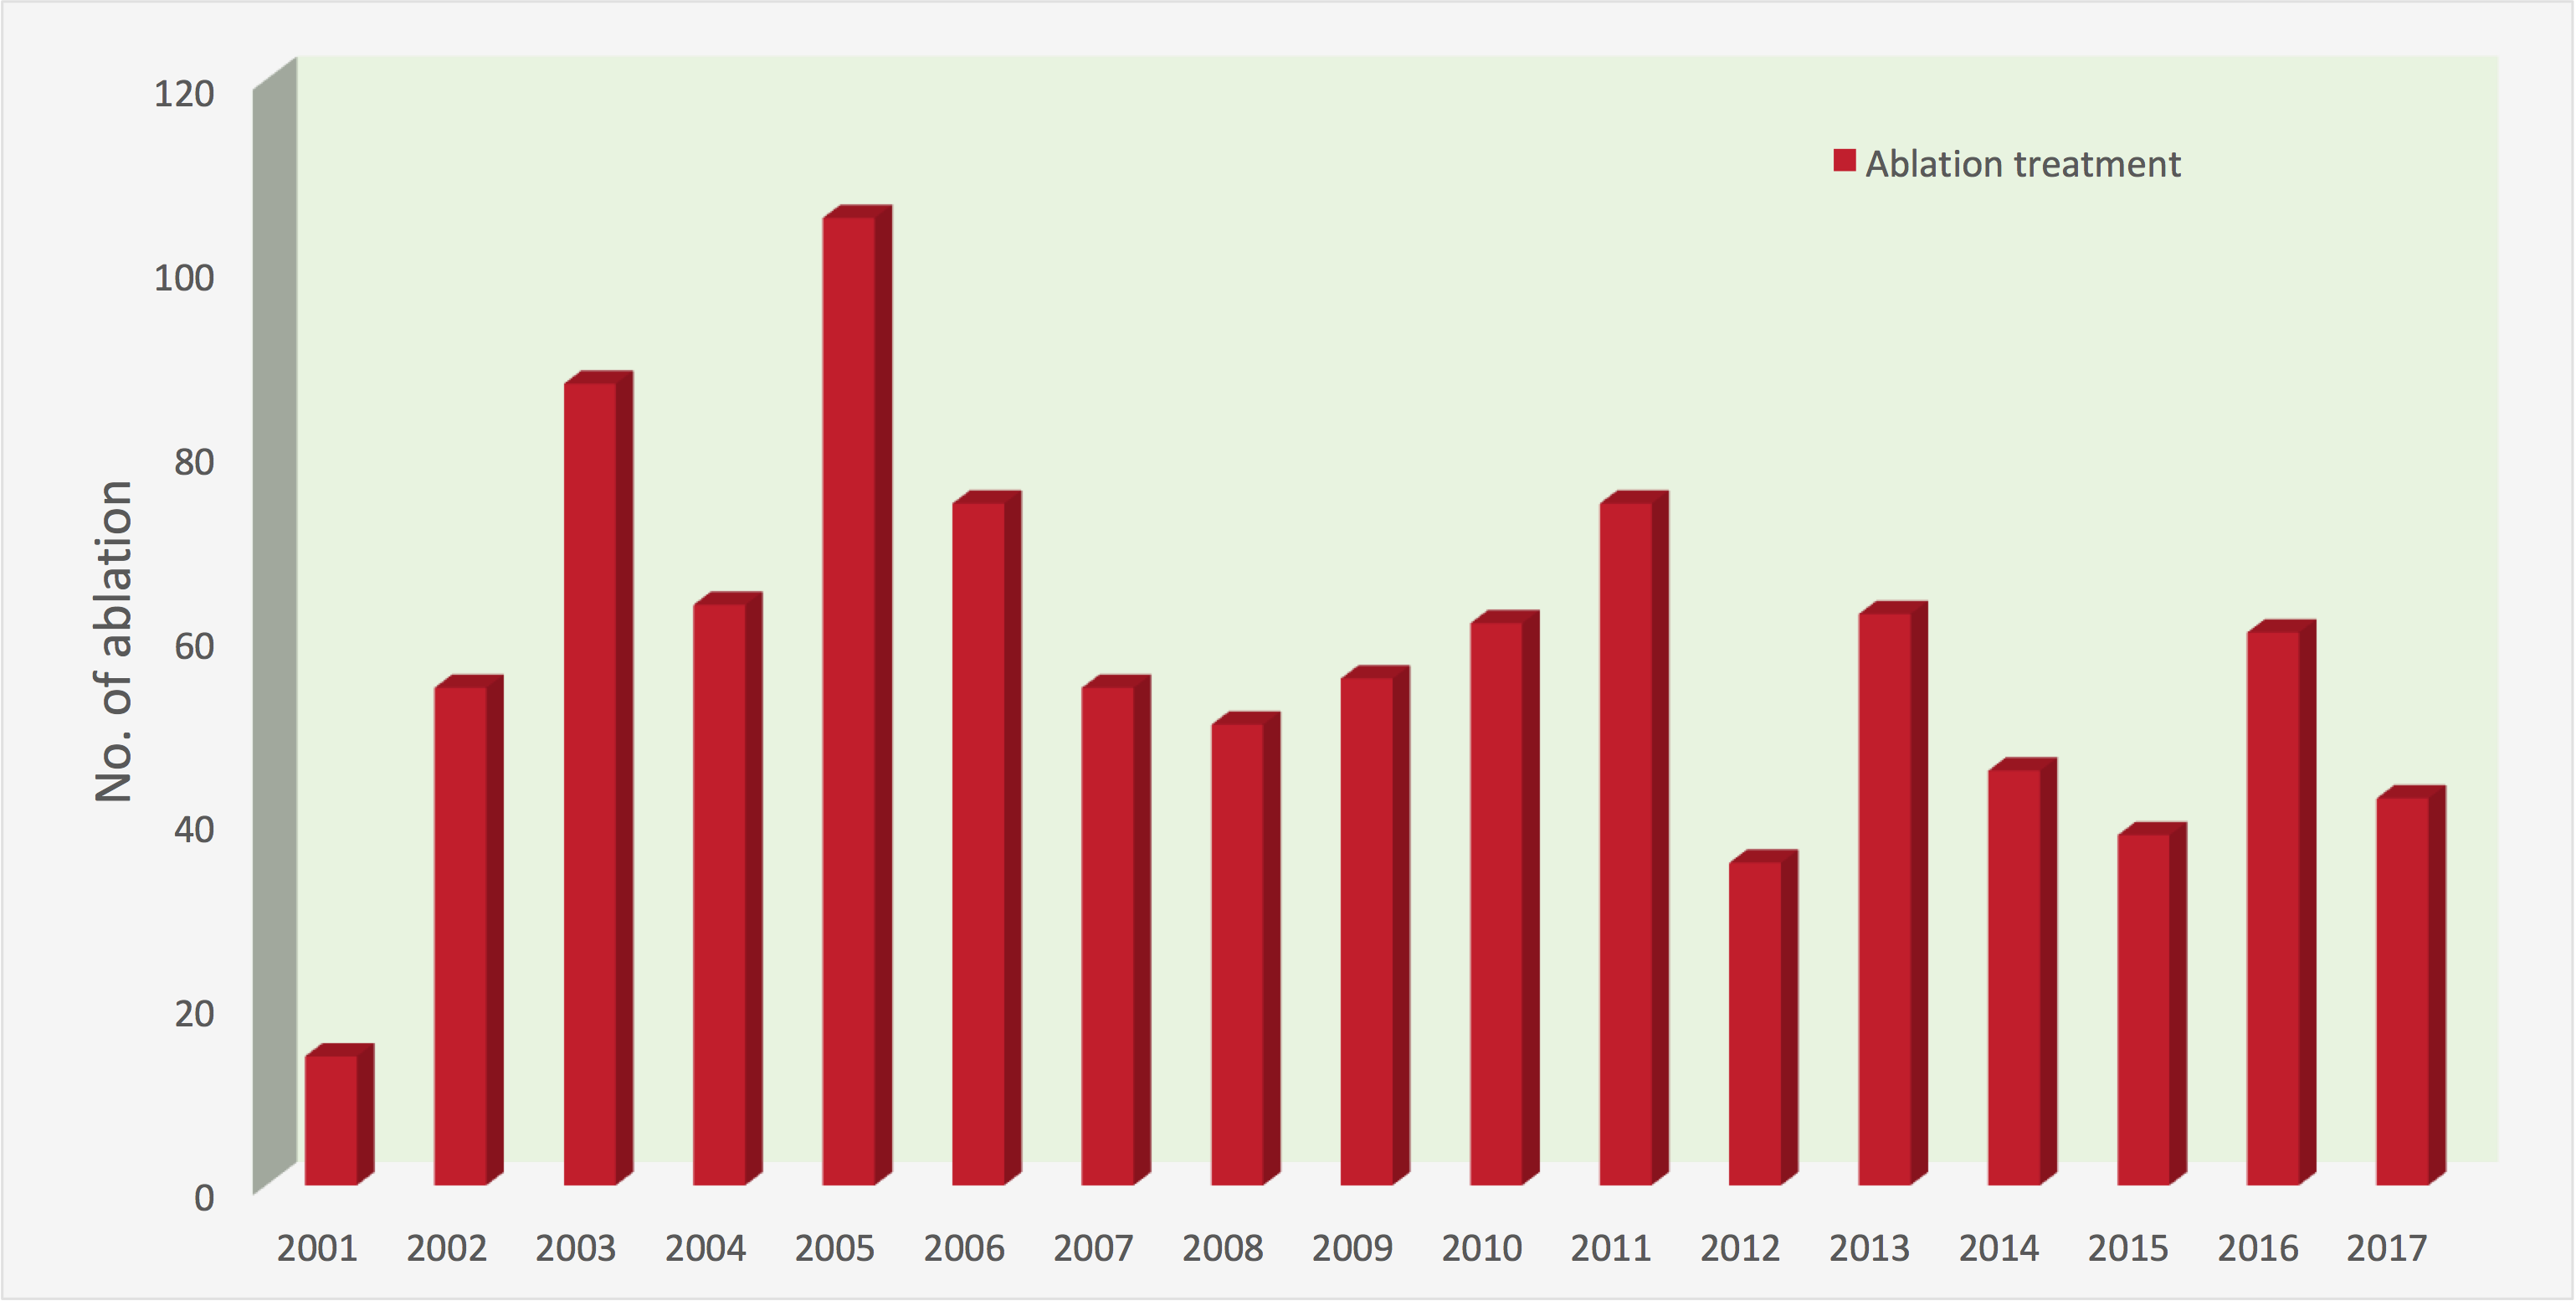 Number of ablation treatments performed over the past 16 years